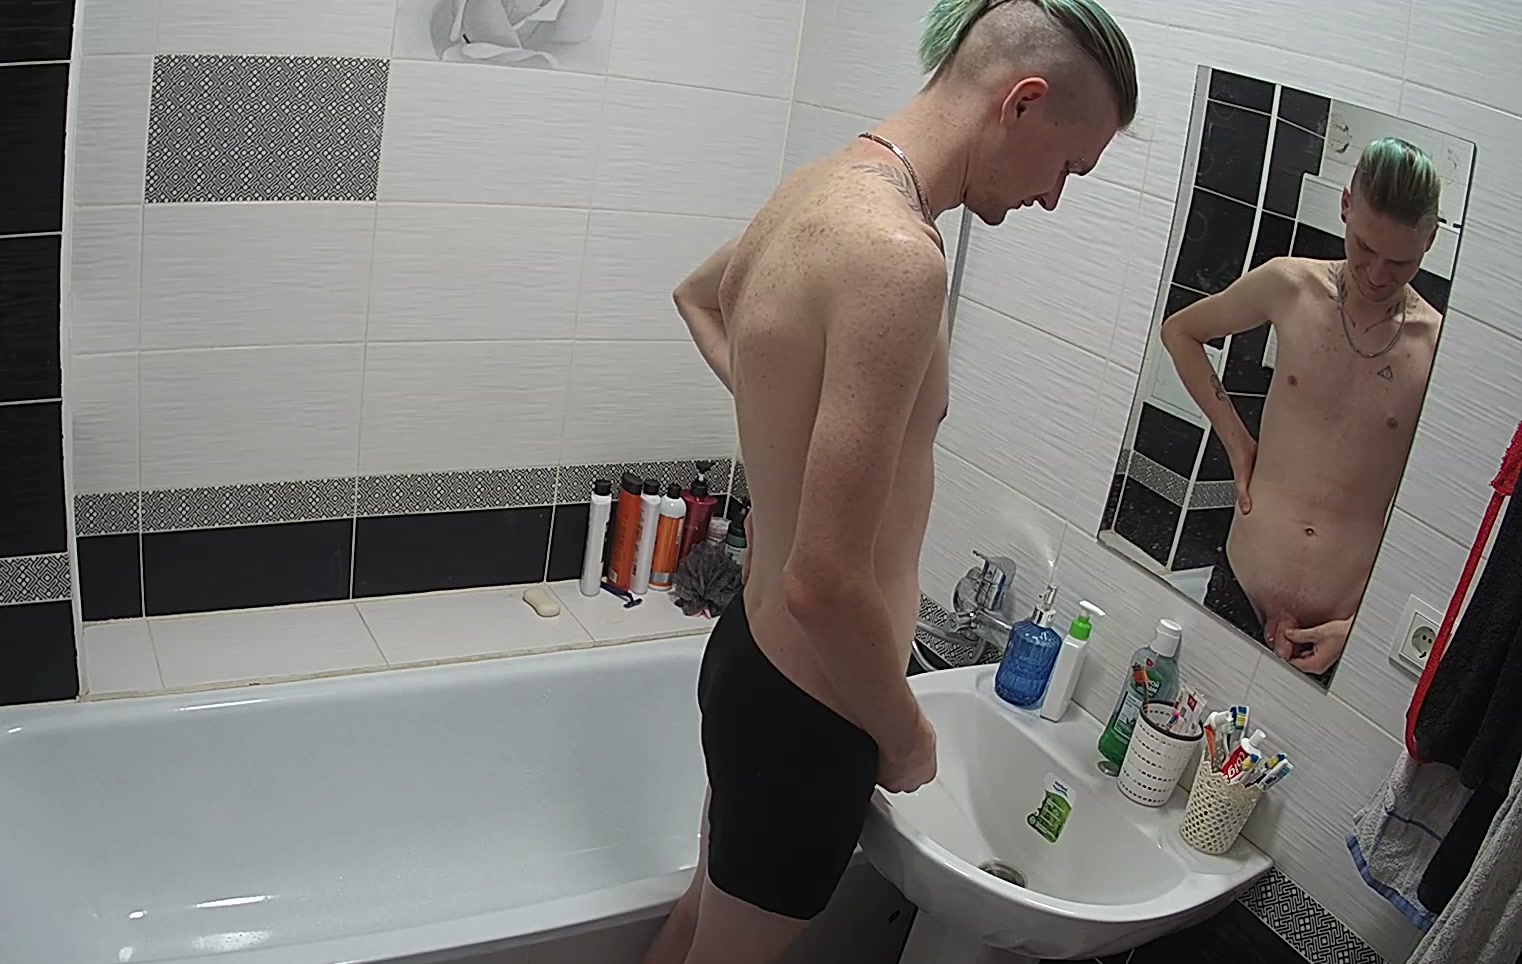 Guy pissing in the sink